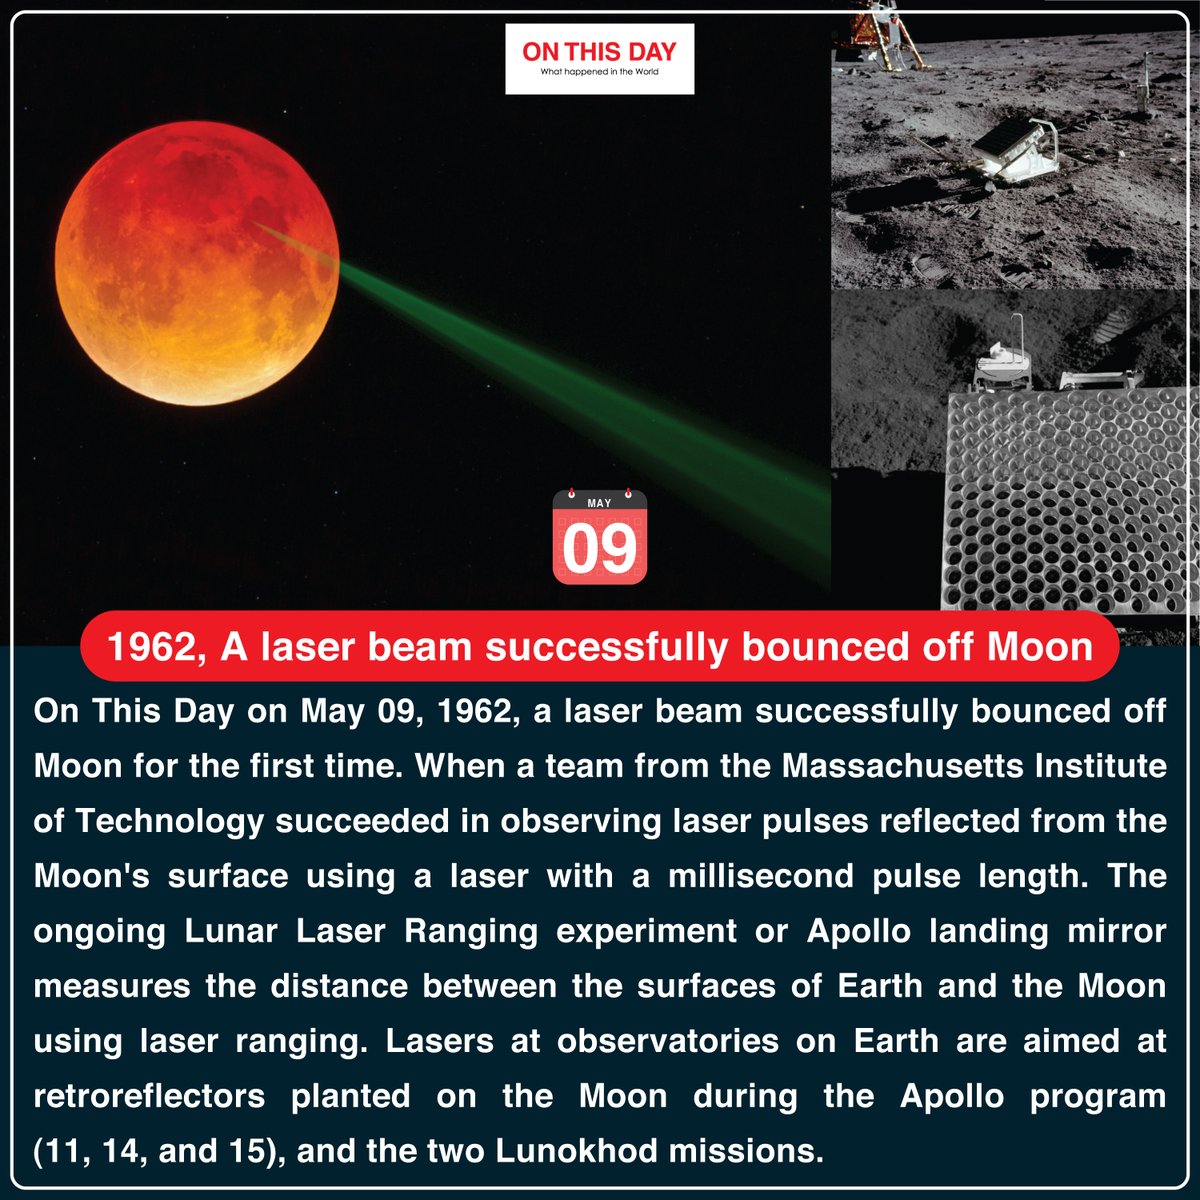 #OnThisDay  1962, A Laser beam successfully bounced off Moon for the first time

#May #May09 #historytoday #in1962 #60yearsago #onthisdayinhistory #doyouknow #laserbeam #moon #laserbeambouncedoffmoon #firsttime #MIT #MassachusettsInstituteofTechnology #Apollo